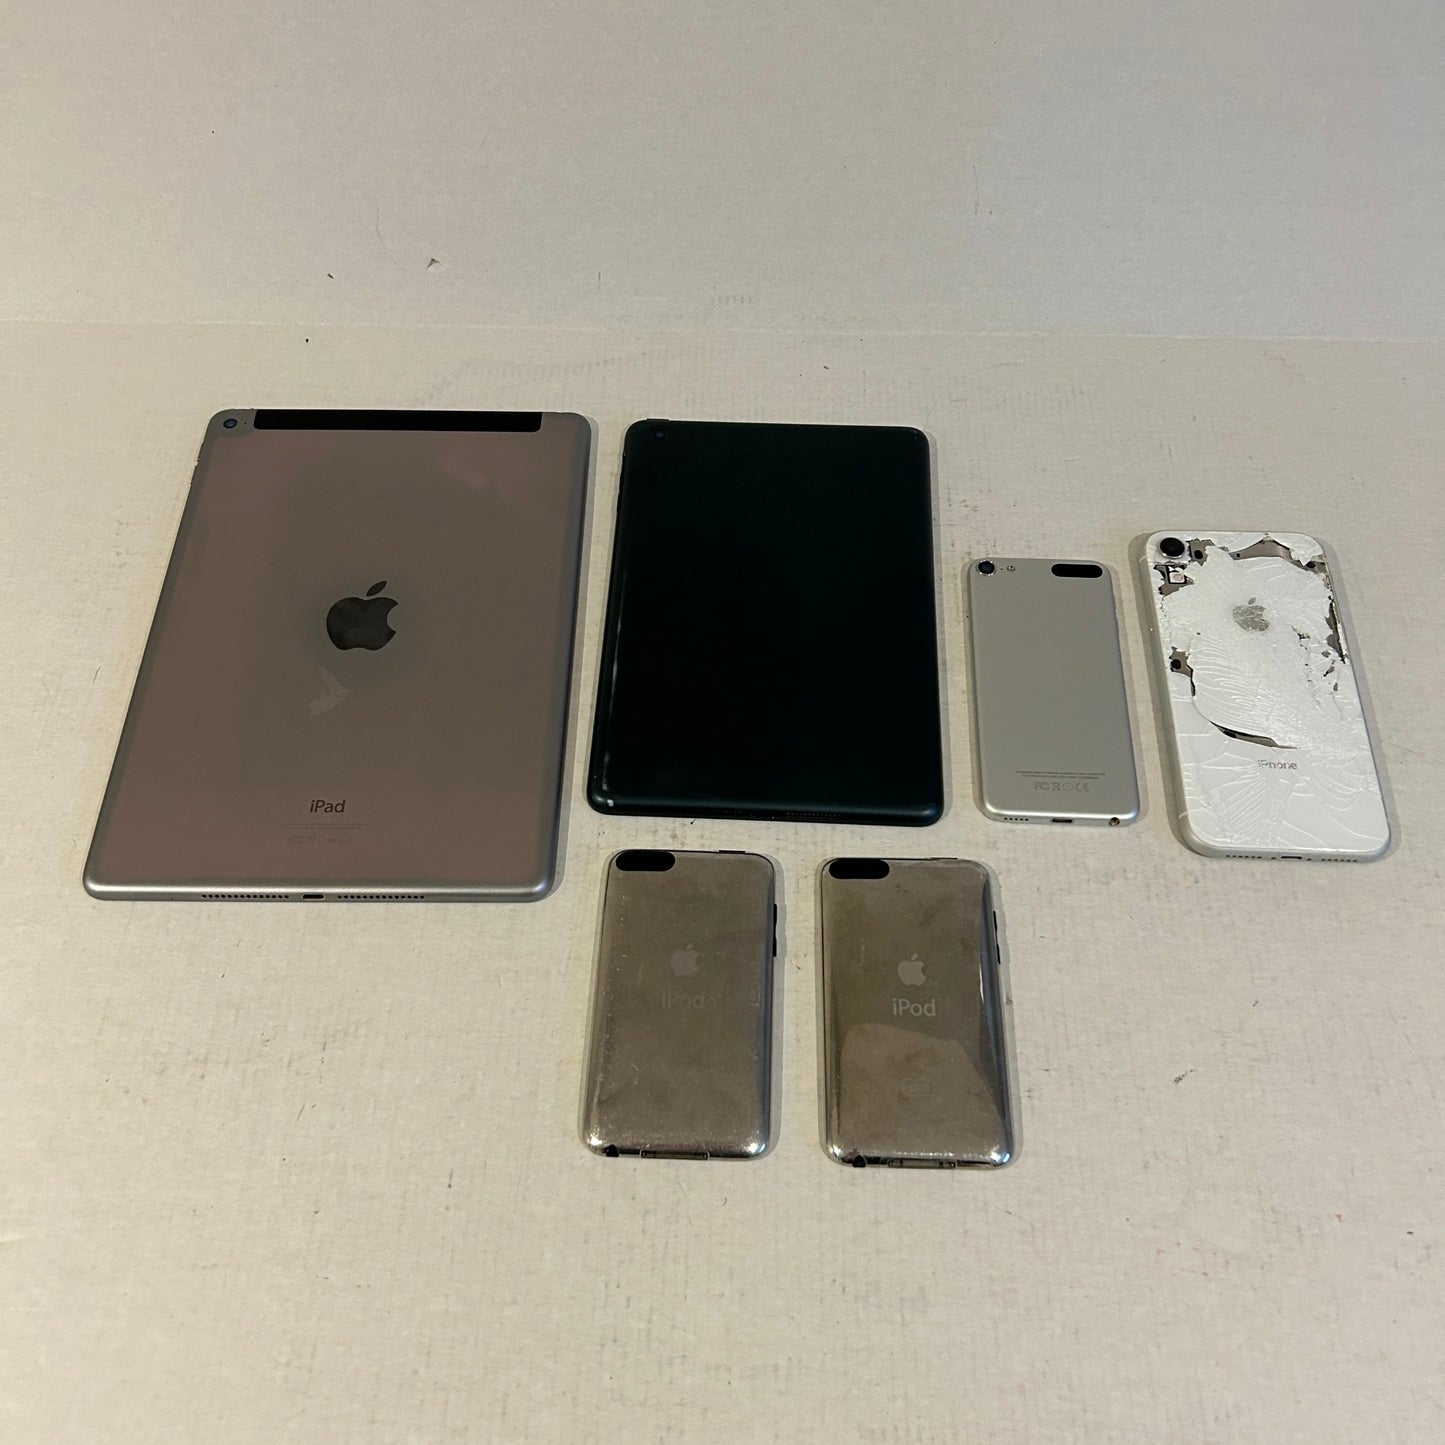 For Parts - Apple iPod, iPad, iPhone lot